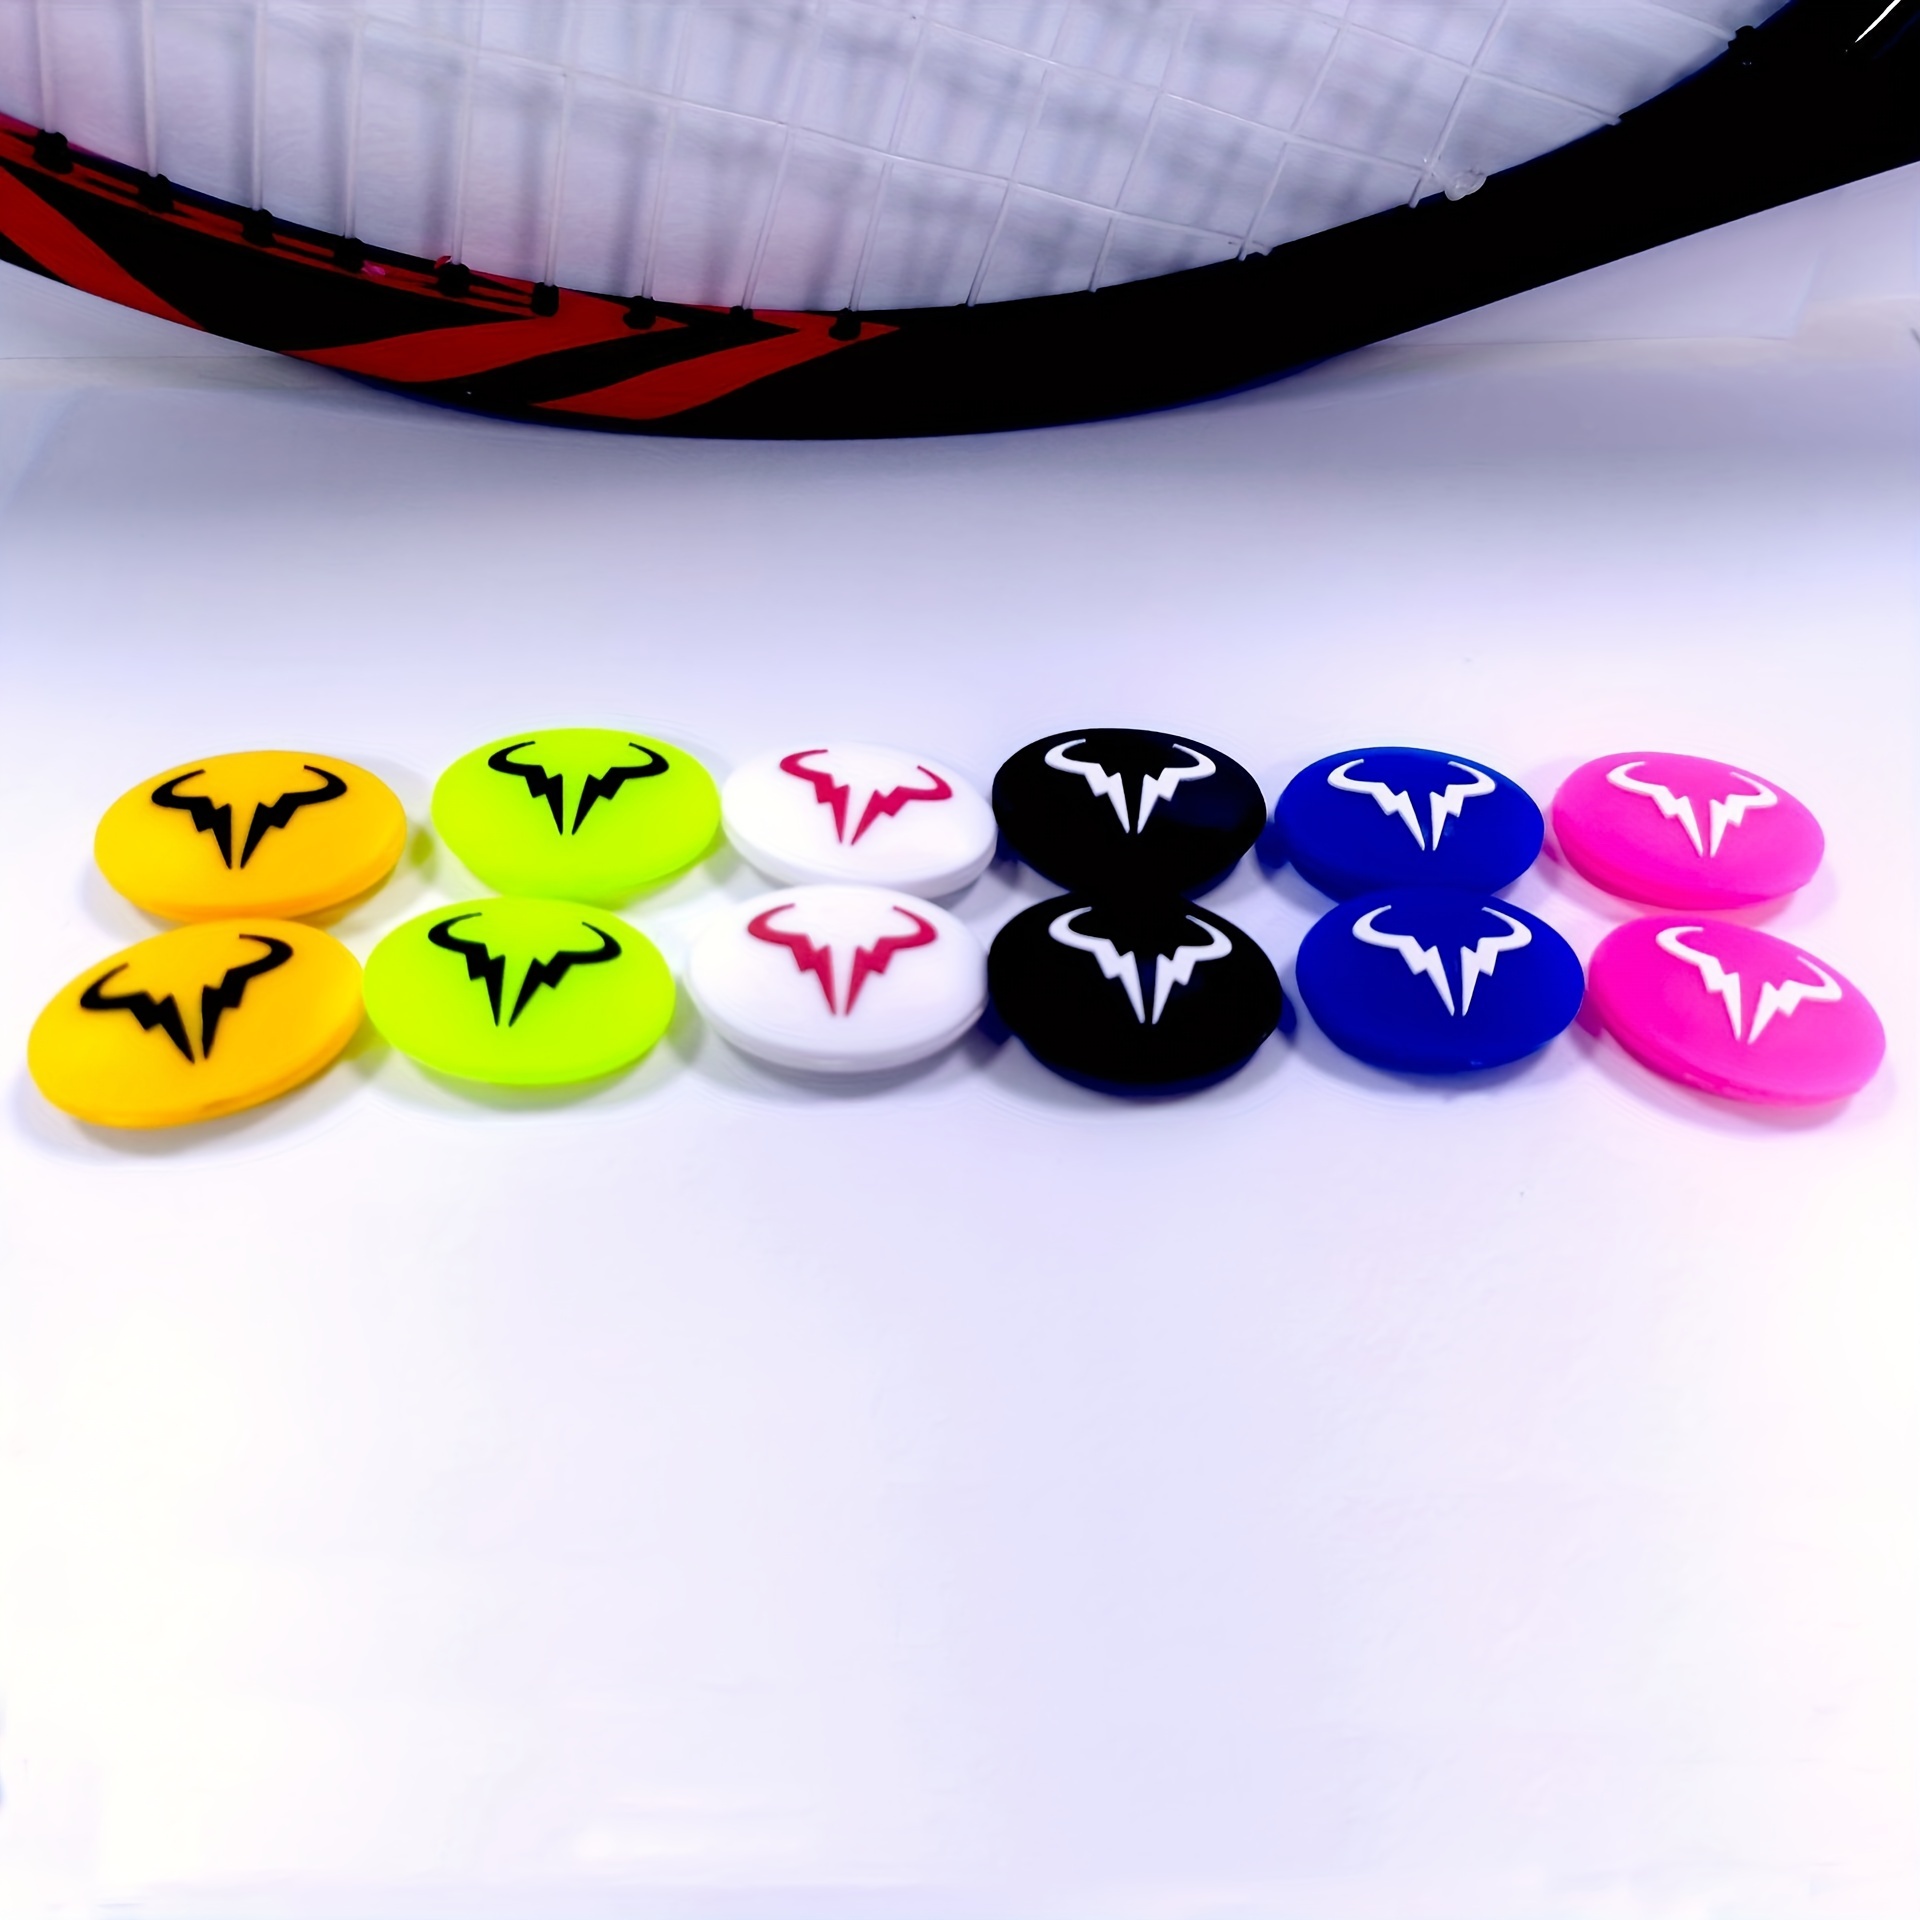 Super Absorbent Anti-slip Racket Grip For Tennis, Badminton, And